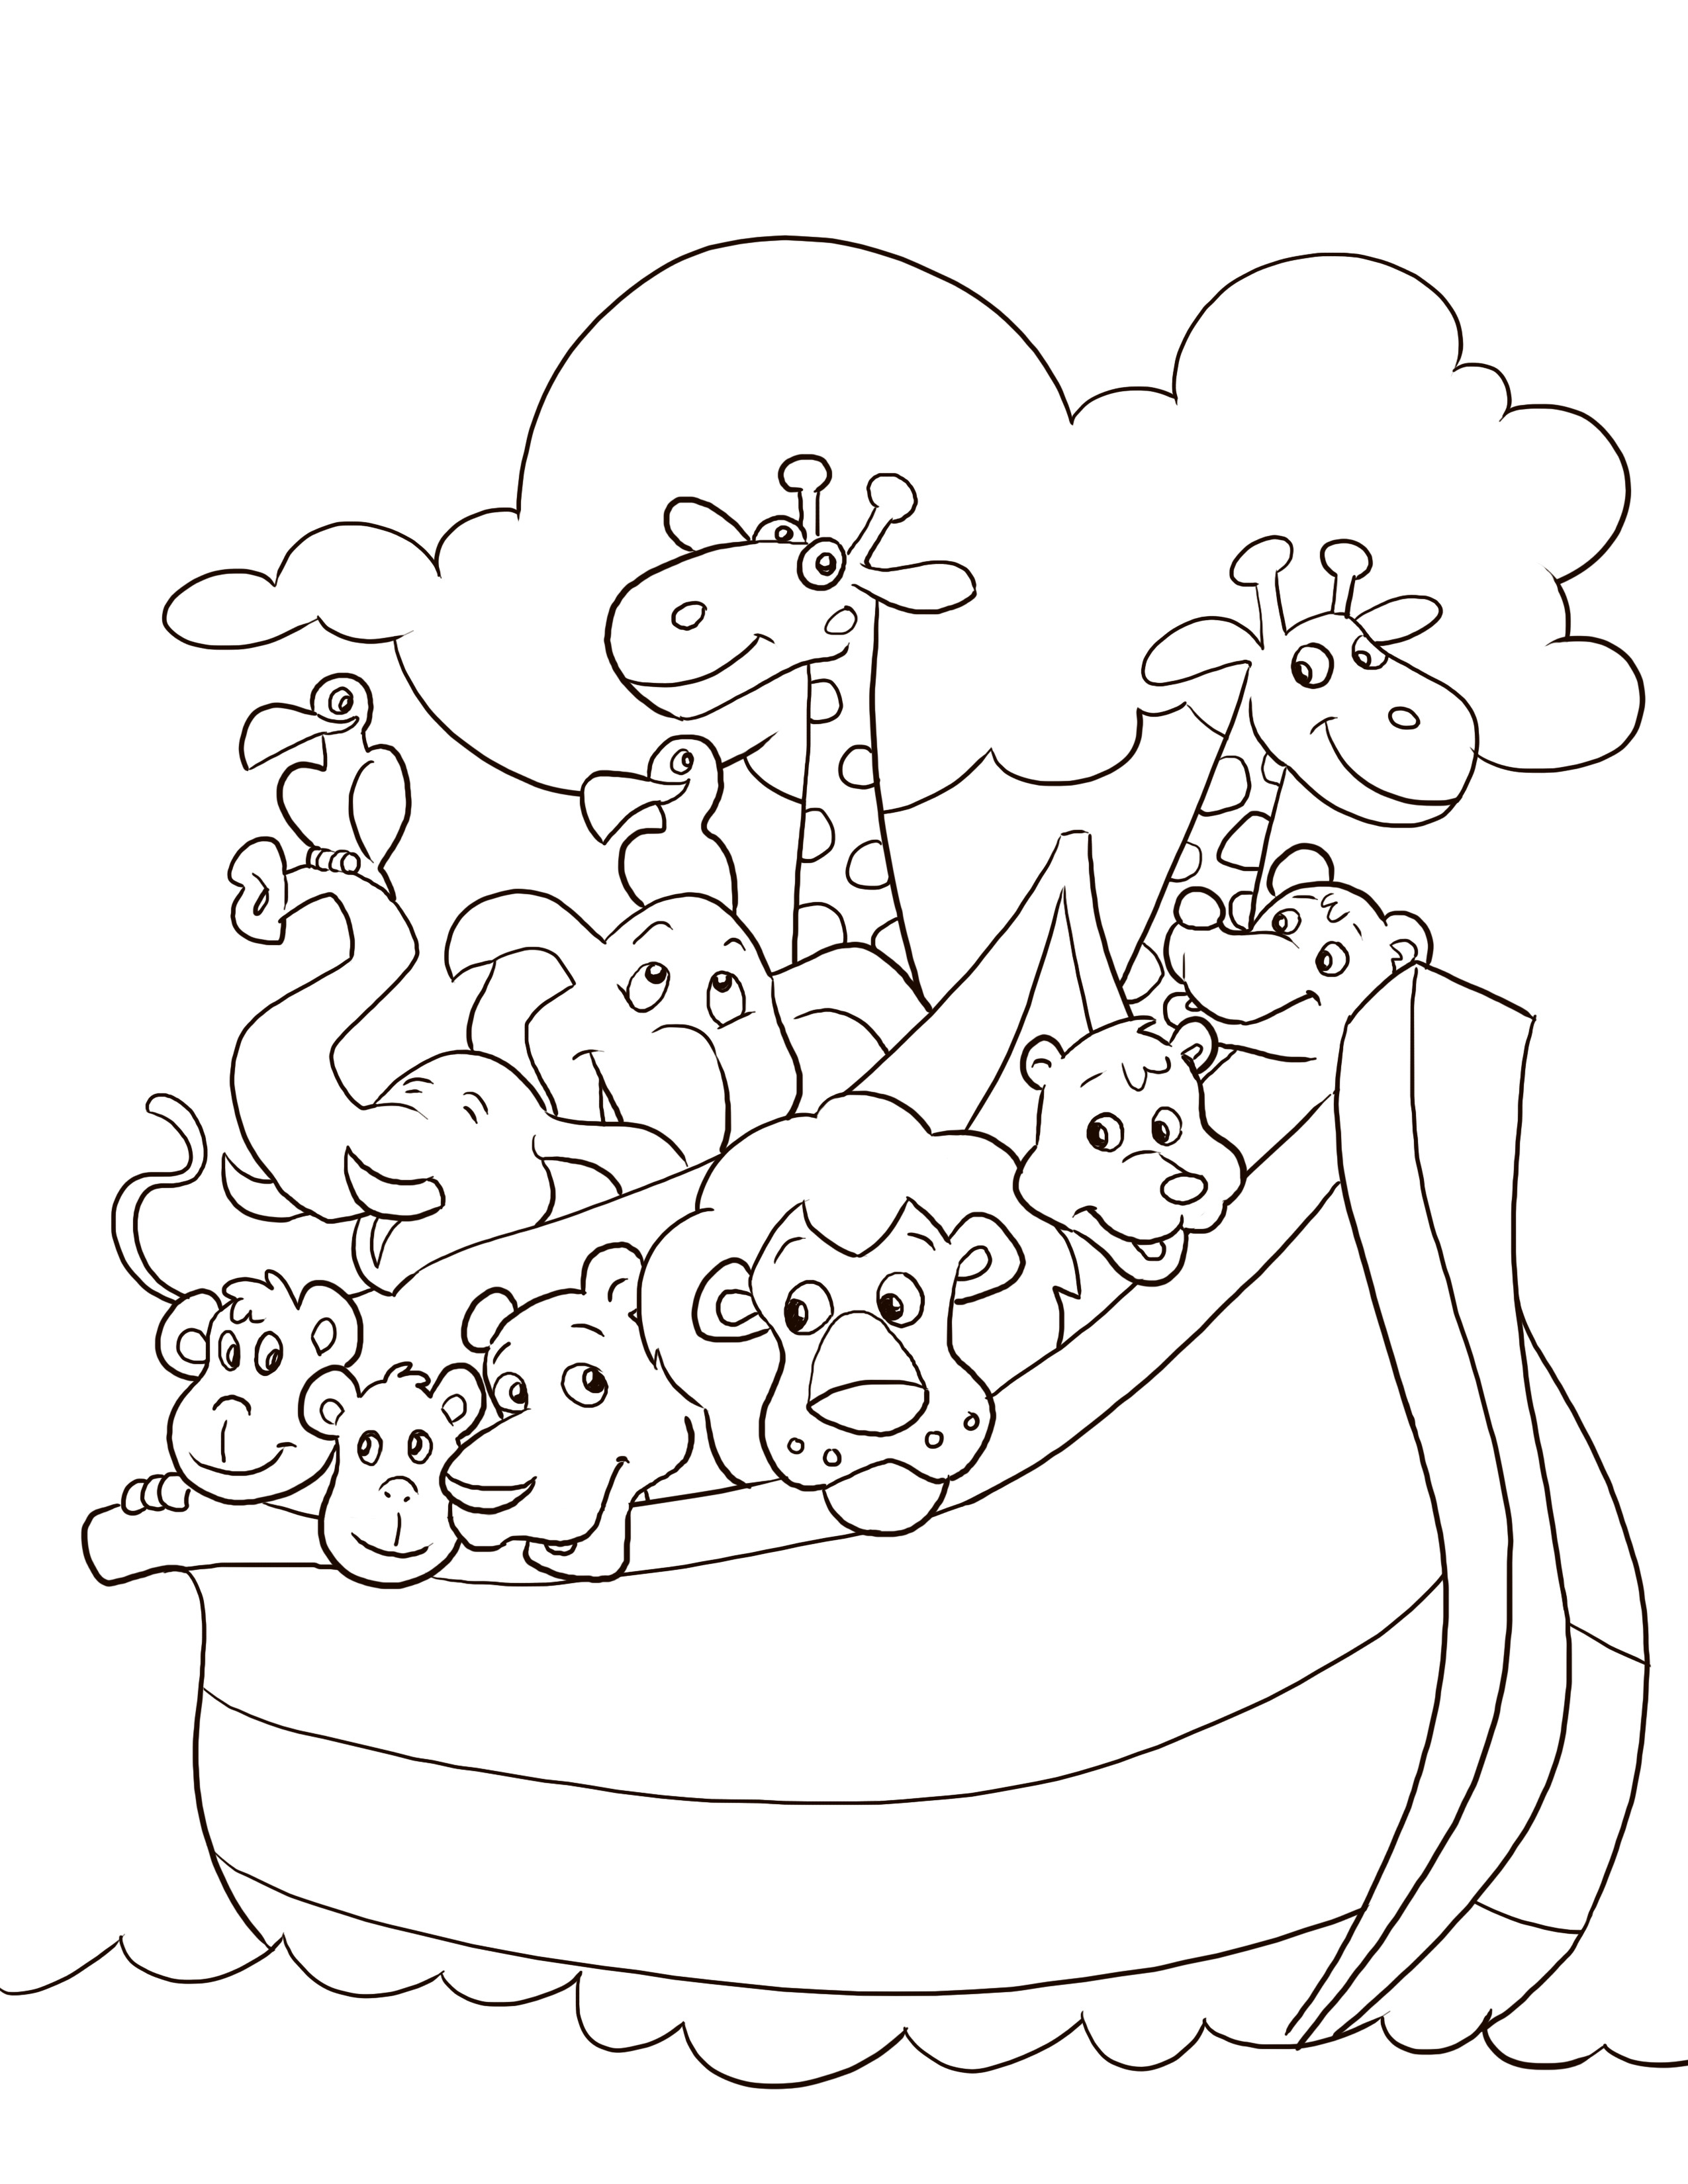 Printable Coloring Pages Bible
 Free Coloring Pages For Kids To Print Bible The Color Panda